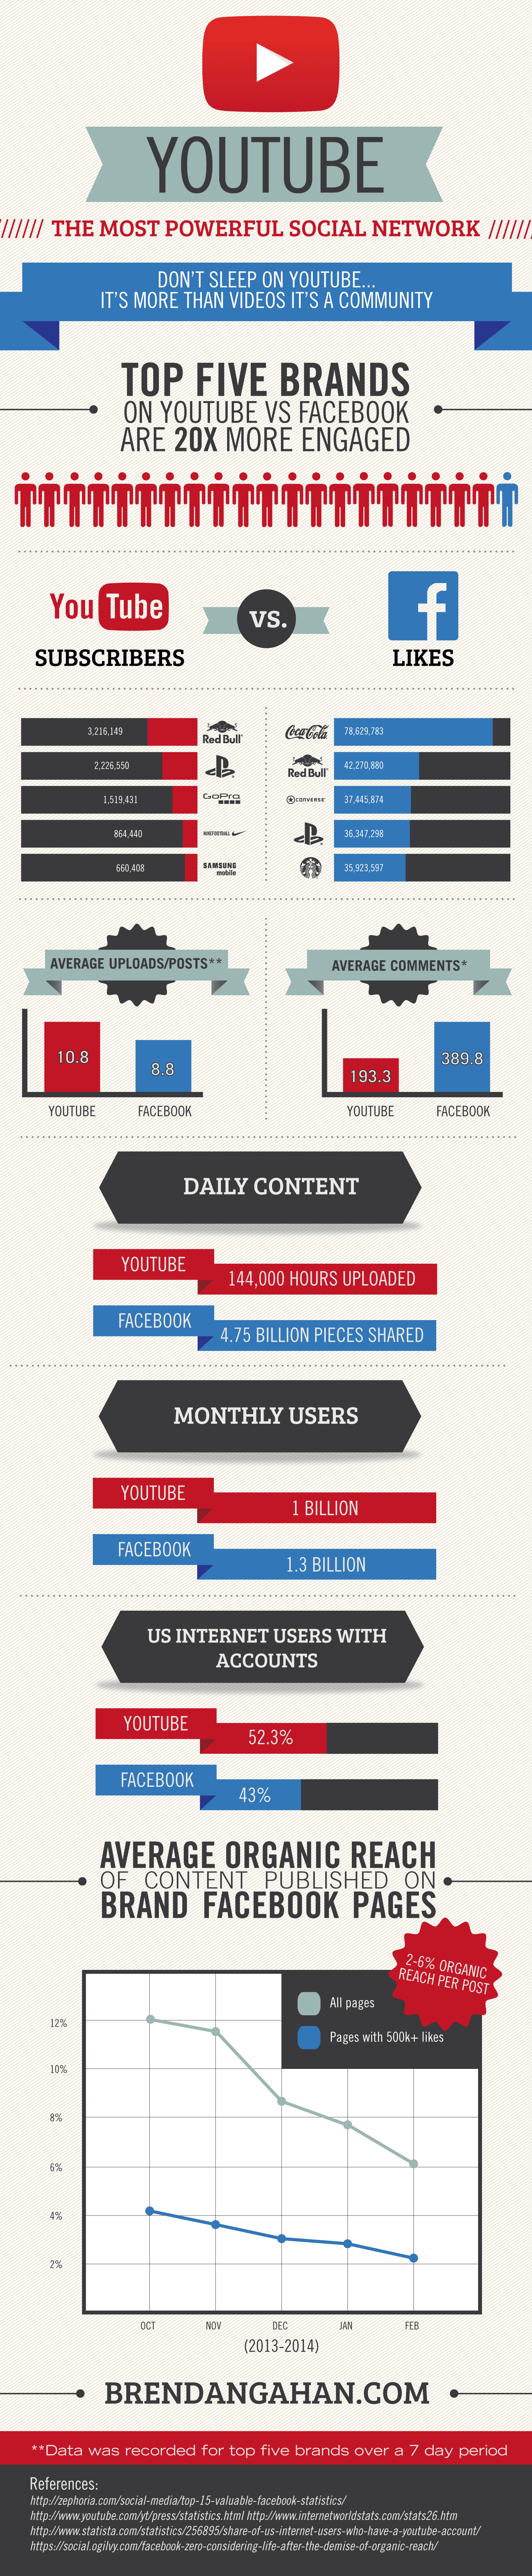 YouTube vs Facebook Infographic Engagement 